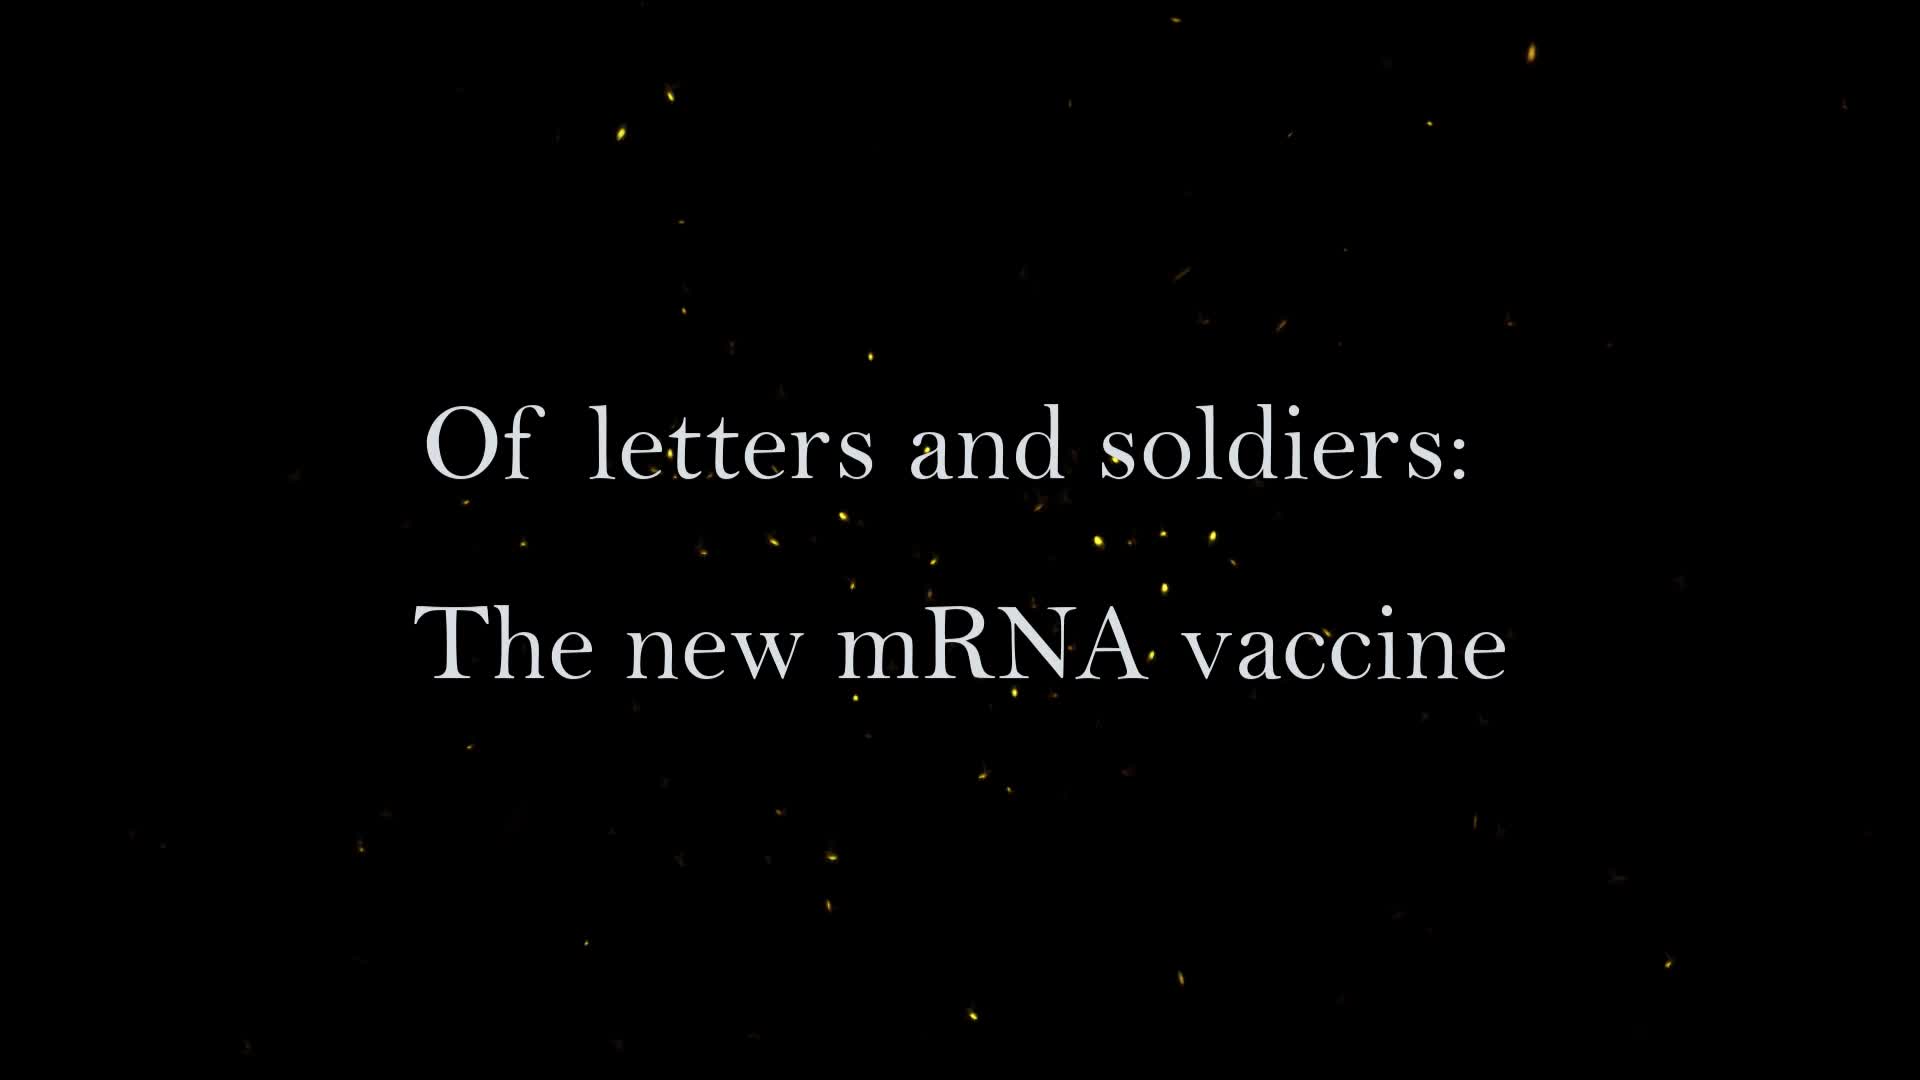 Of letters and soldiers. The new mRNA vaccine